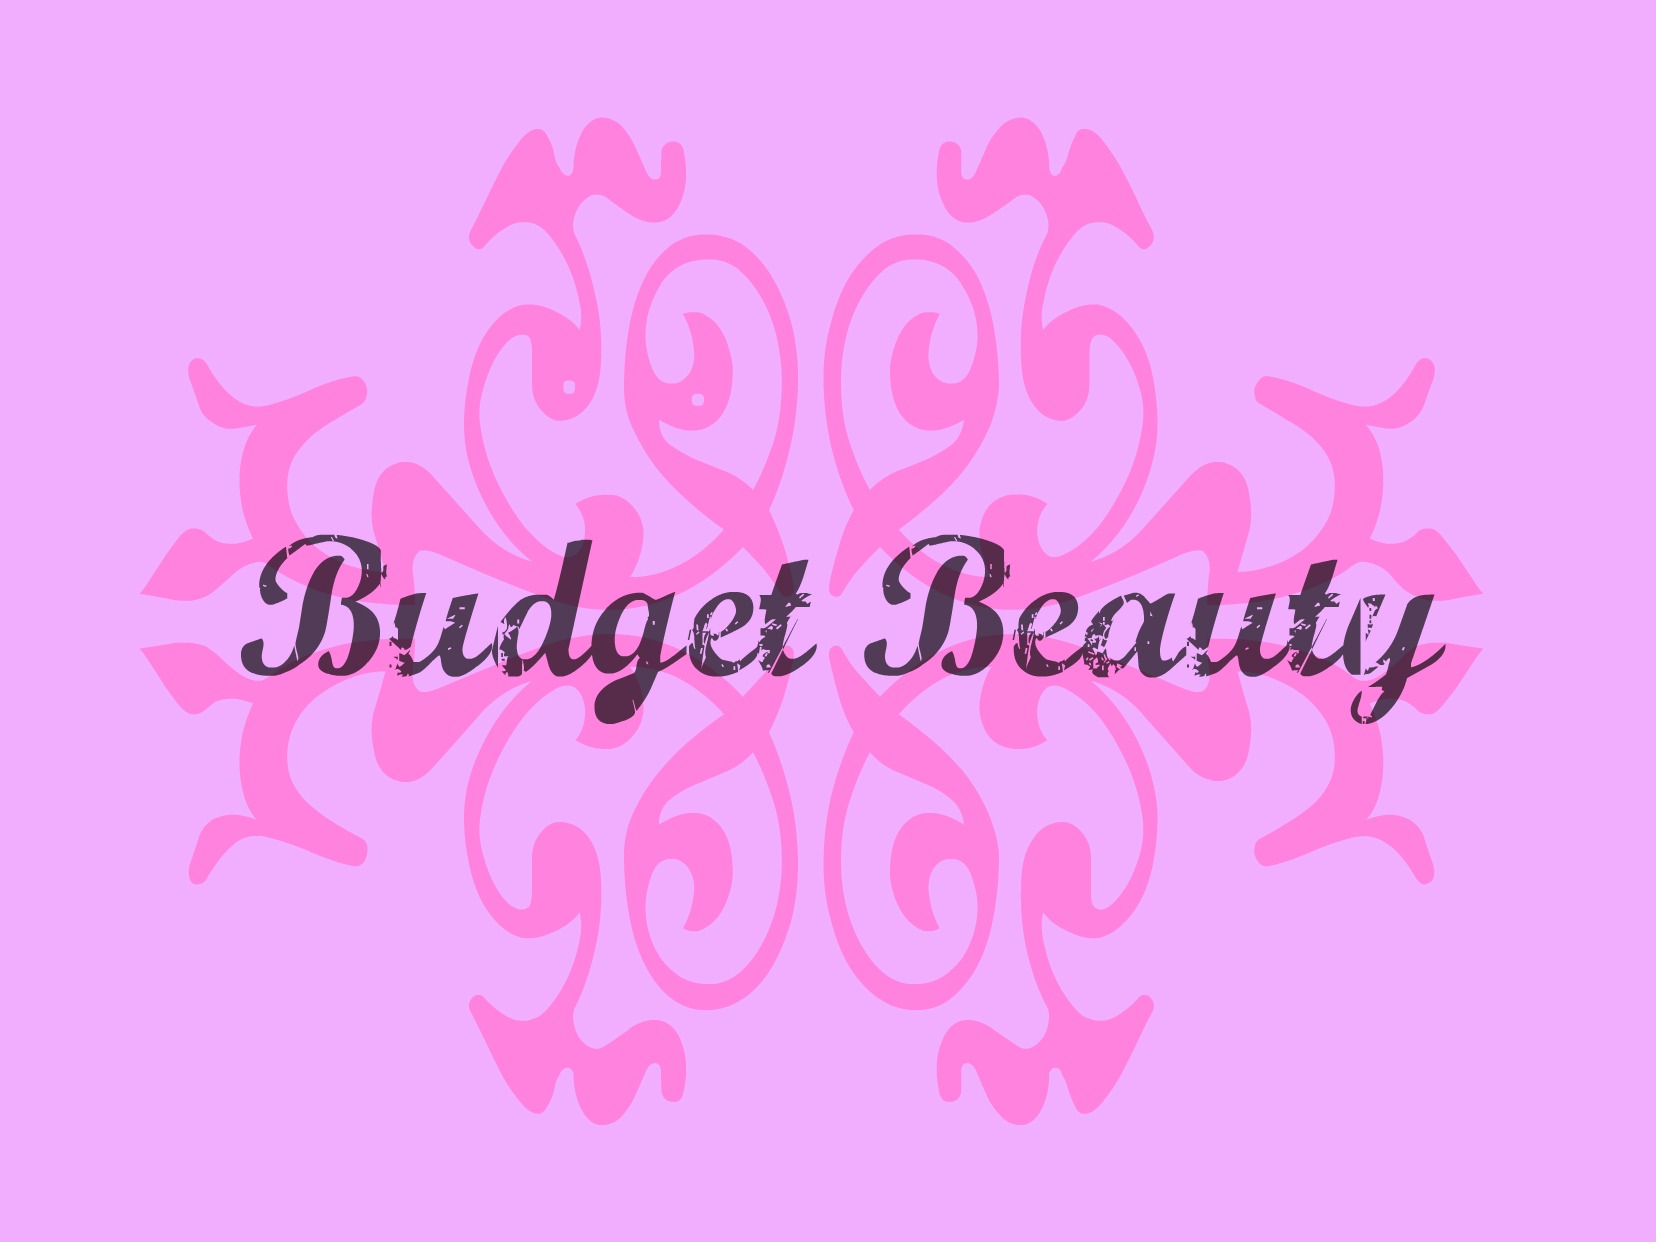 Beauty Makeover on a Budget